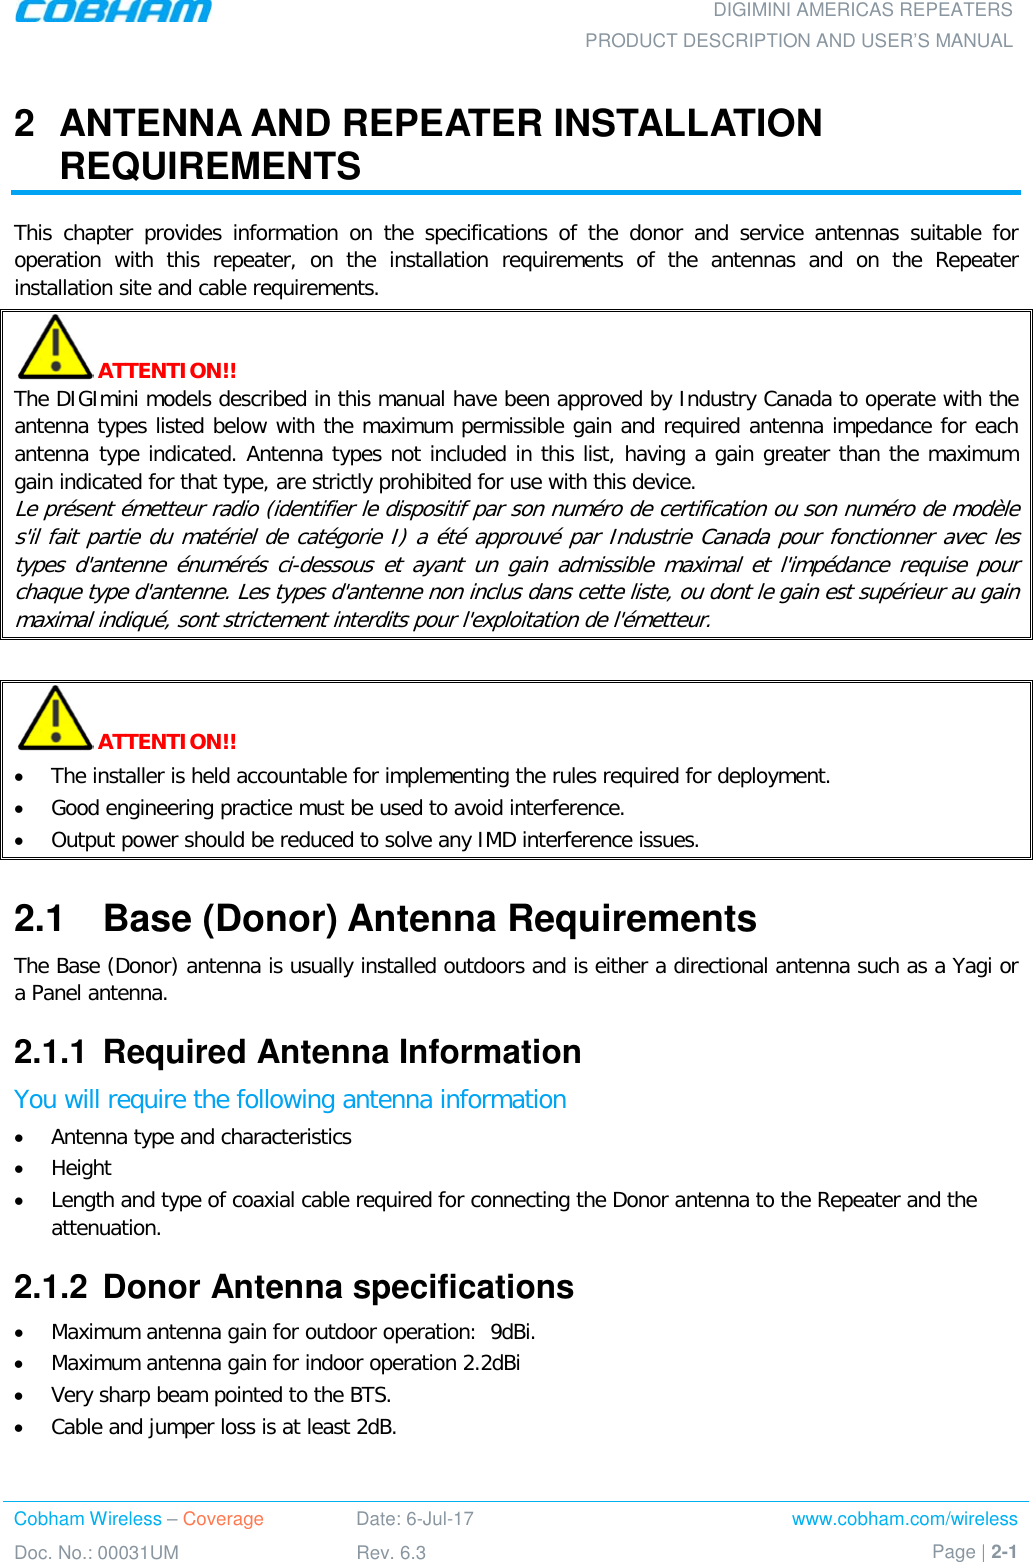 DIGIMINI AMERICAS REPEATERS PRODUCT DESCRIPTION AND USER’S MANUAL Cobham Wireless – Coverage Date: 6-Jul-17 www.cobham.com/wireless Doc. No.: 00031UM Rev. 6.3 Page | 2-1  2  ANTENNA AND REPEATER INSTALLATION REQUIREMENTS This chapter provides information on the specifications of the donor and service antennas suitable for operation with this repeater, on the installation requirements of the antennas and on the Repeater installation site and cable requirements.  ATTENTION!! The DIGImini models described in this manual have been approved by Industry Canada to operate with the antenna types listed below with the maximum permissible gain and required antenna impedance for each antenna type indicated. Antenna types not included in this list, having a gain greater than the maximum gain indicated for that type, are strictly prohibited for use with this device. Le présent émetteur radio (identifier le dispositif par son numéro de certification ou son numéro de modèle s&apos;il fait partie du matériel de catégorie I) a été approuvé par Industrie Canada pour fonctionner avec les types d&apos;antenne énumérés ci-dessous et ayant un gain admissible maximal et l&apos;impédance requise pour chaque type d&apos;antenne. Les types d&apos;antenne non inclus dans cette liste, ou dont le gain est supérieur au gain maximal indiqué, sont strictement interdits pour l&apos;exploitation de l&apos;émetteur.   ATTENTION!! • The installer is held accountable for implementing the rules required for deployment. • Good engineering practice must be used to avoid interference. • Output power should be reduced to solve any IMD interference issues. 2.1  Base (Donor) Antenna Requirements The Base (Donor) antenna is usually installed outdoors and is either a directional antenna such as a Yagi or a Panel antenna. 2.1.1  Required Antenna Information You will require the following antenna information • Antenna type and characteristics • Height • Length and type of coaxial cable required for connecting the Donor antenna to the Repeater and the attenuation. 2.1.2  Donor Antenna specifications • Maximum antenna gain for outdoor operation:  9dBi.   • Maximum antenna gain for indoor operation 2.2dBi • Very sharp beam pointed to the BTS. • Cable and jumper loss is at least 2dB.   